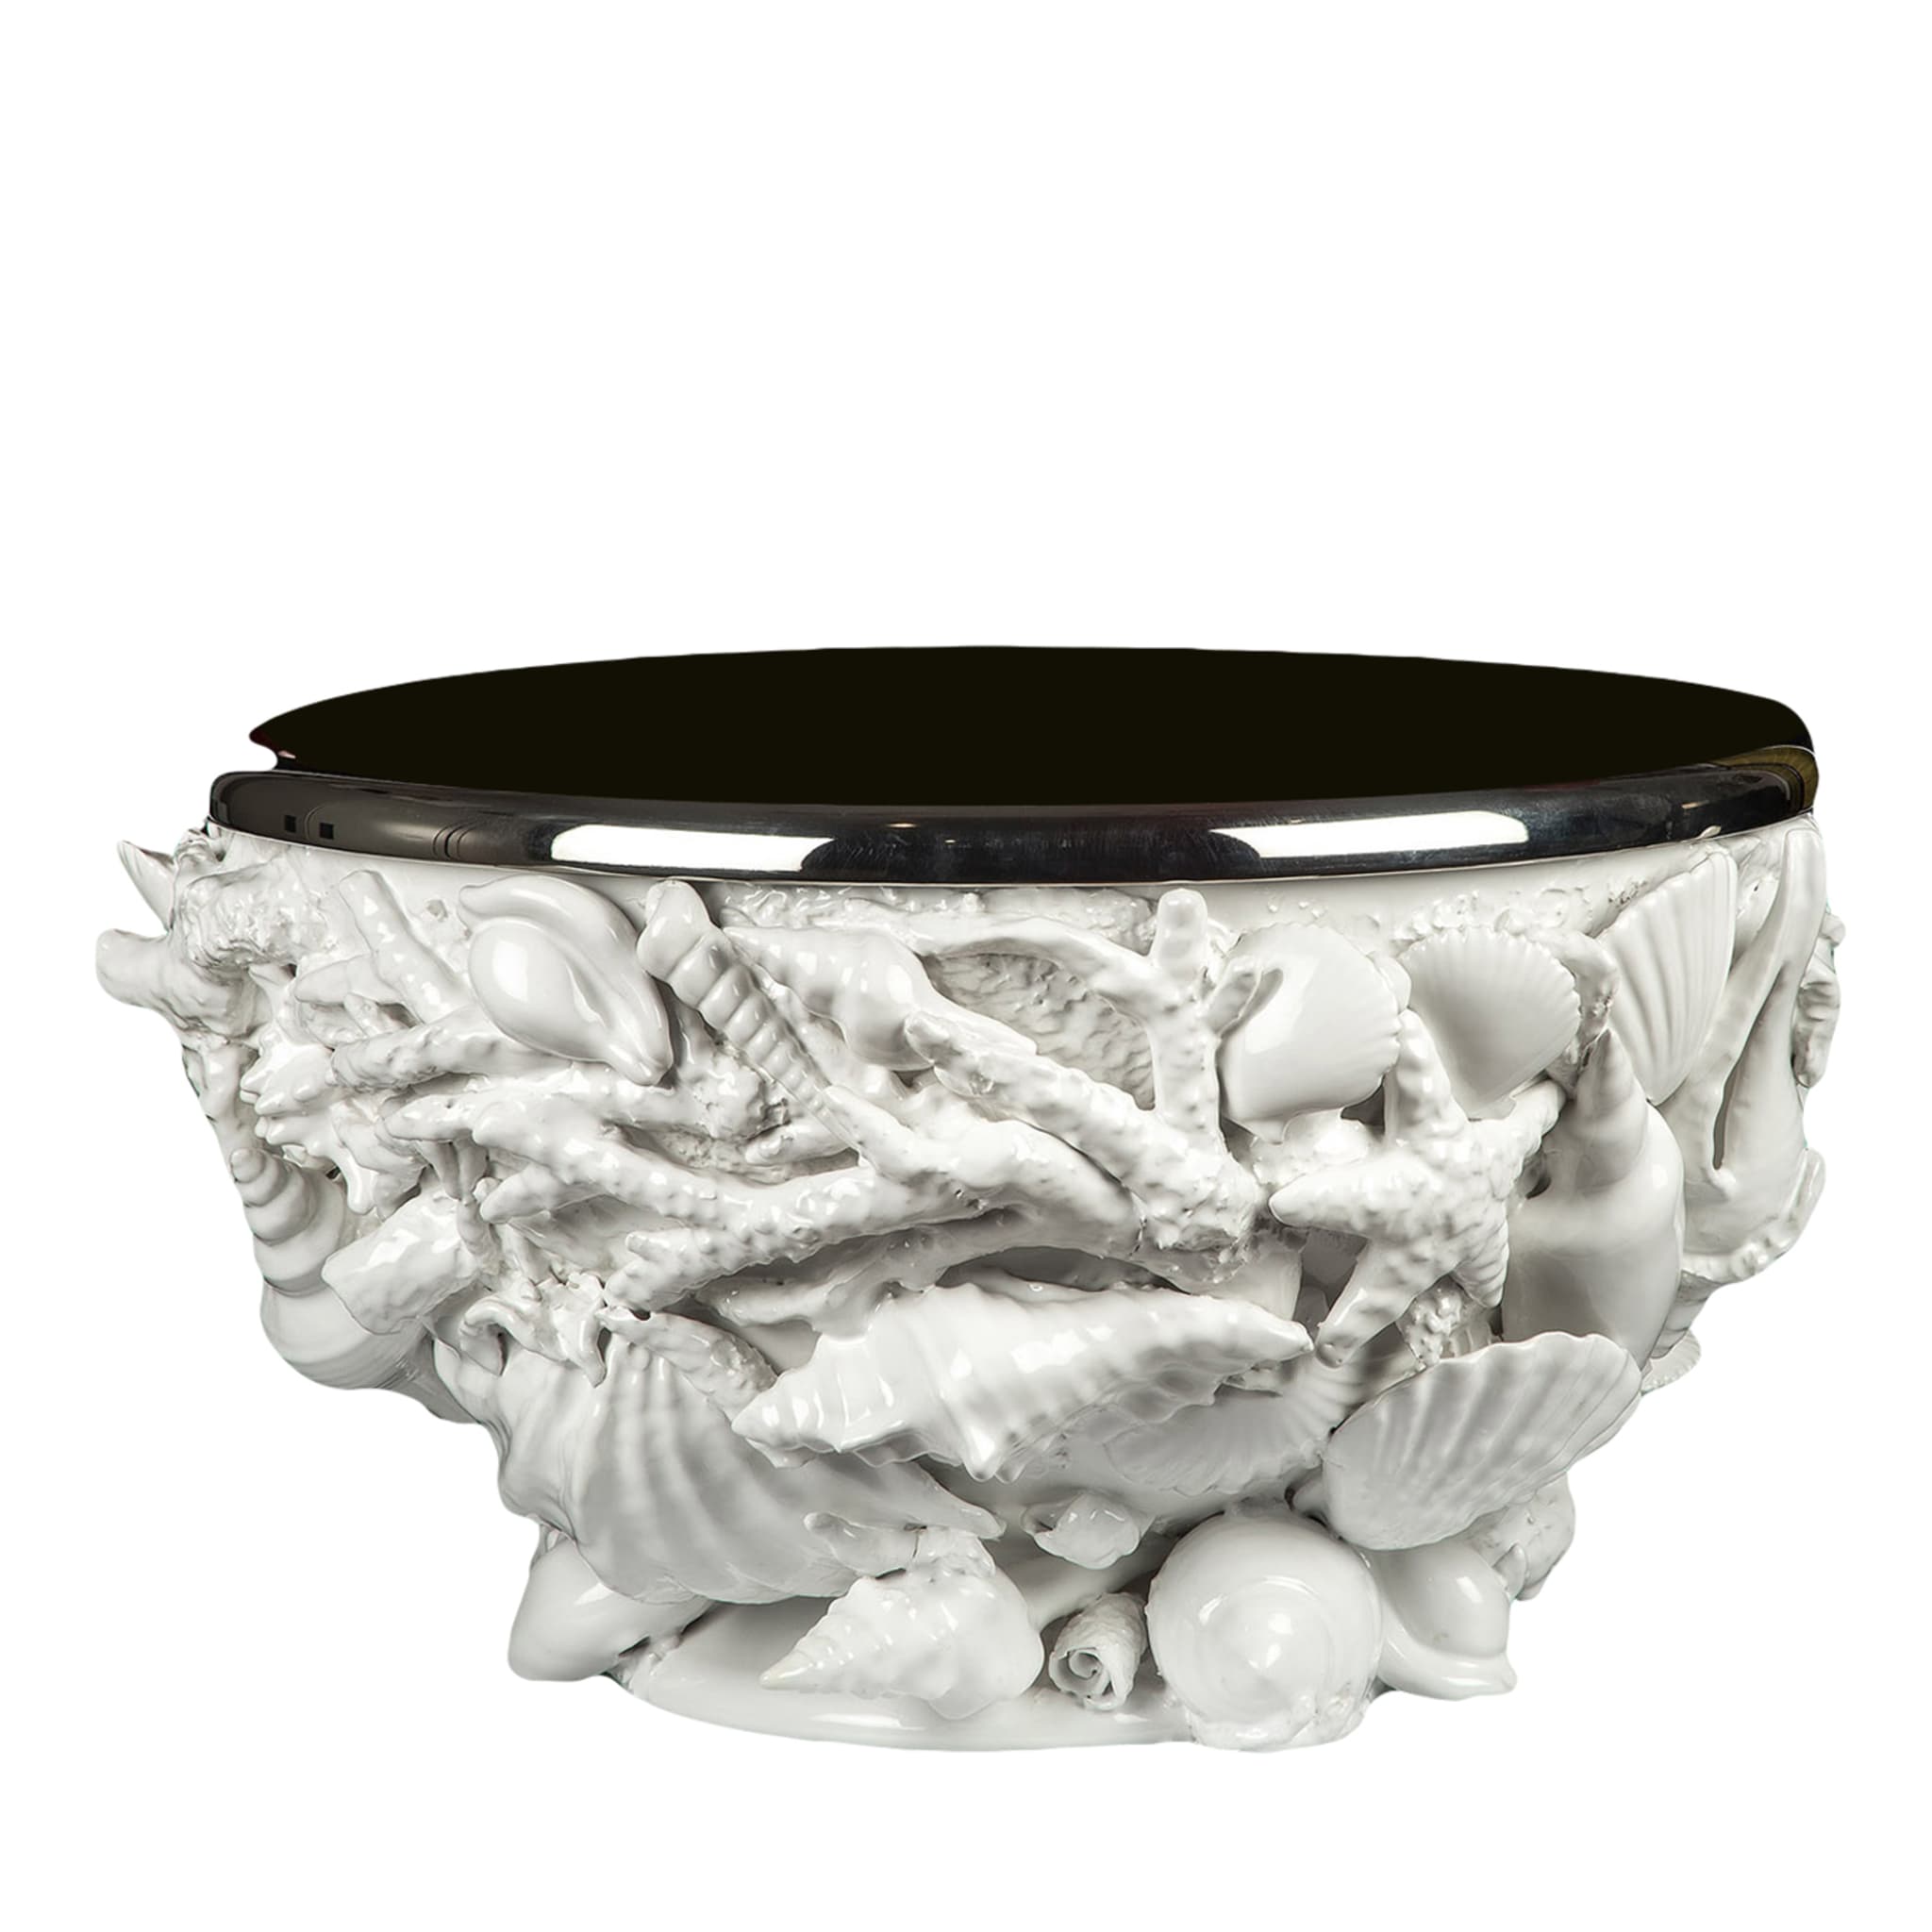 Shells & Coral Reeds White Champagne Bowl by Antonio Fullin - Main view